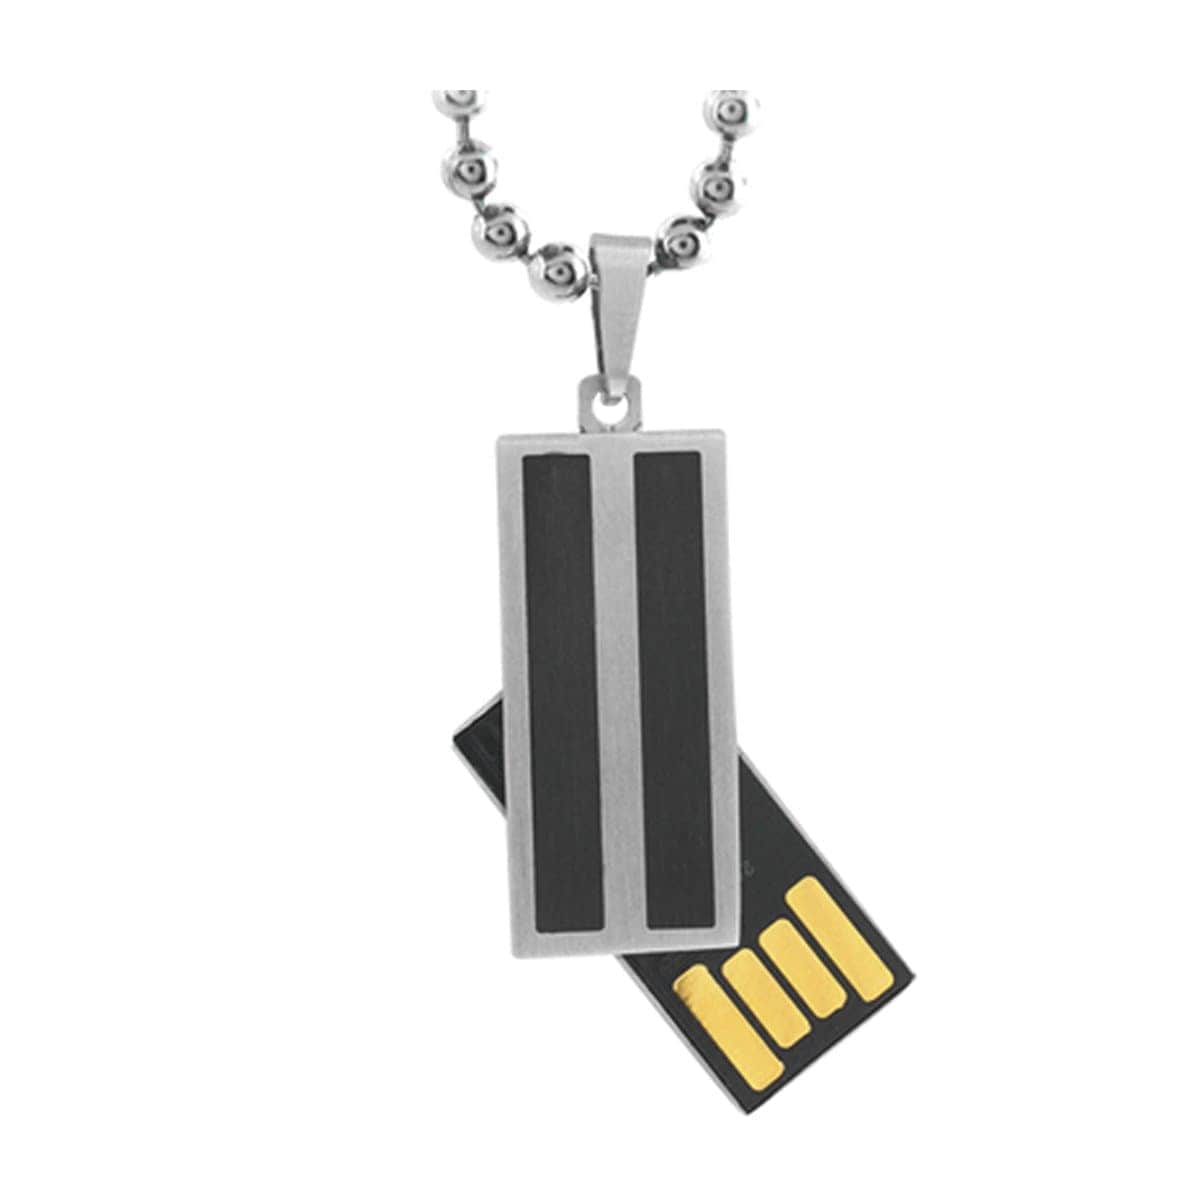 INOX JEWELRY Pendants Black and Silver Tone Stainless Steel with Vertical Bar Pattern 2 GB USB Pendant SSPUSB26